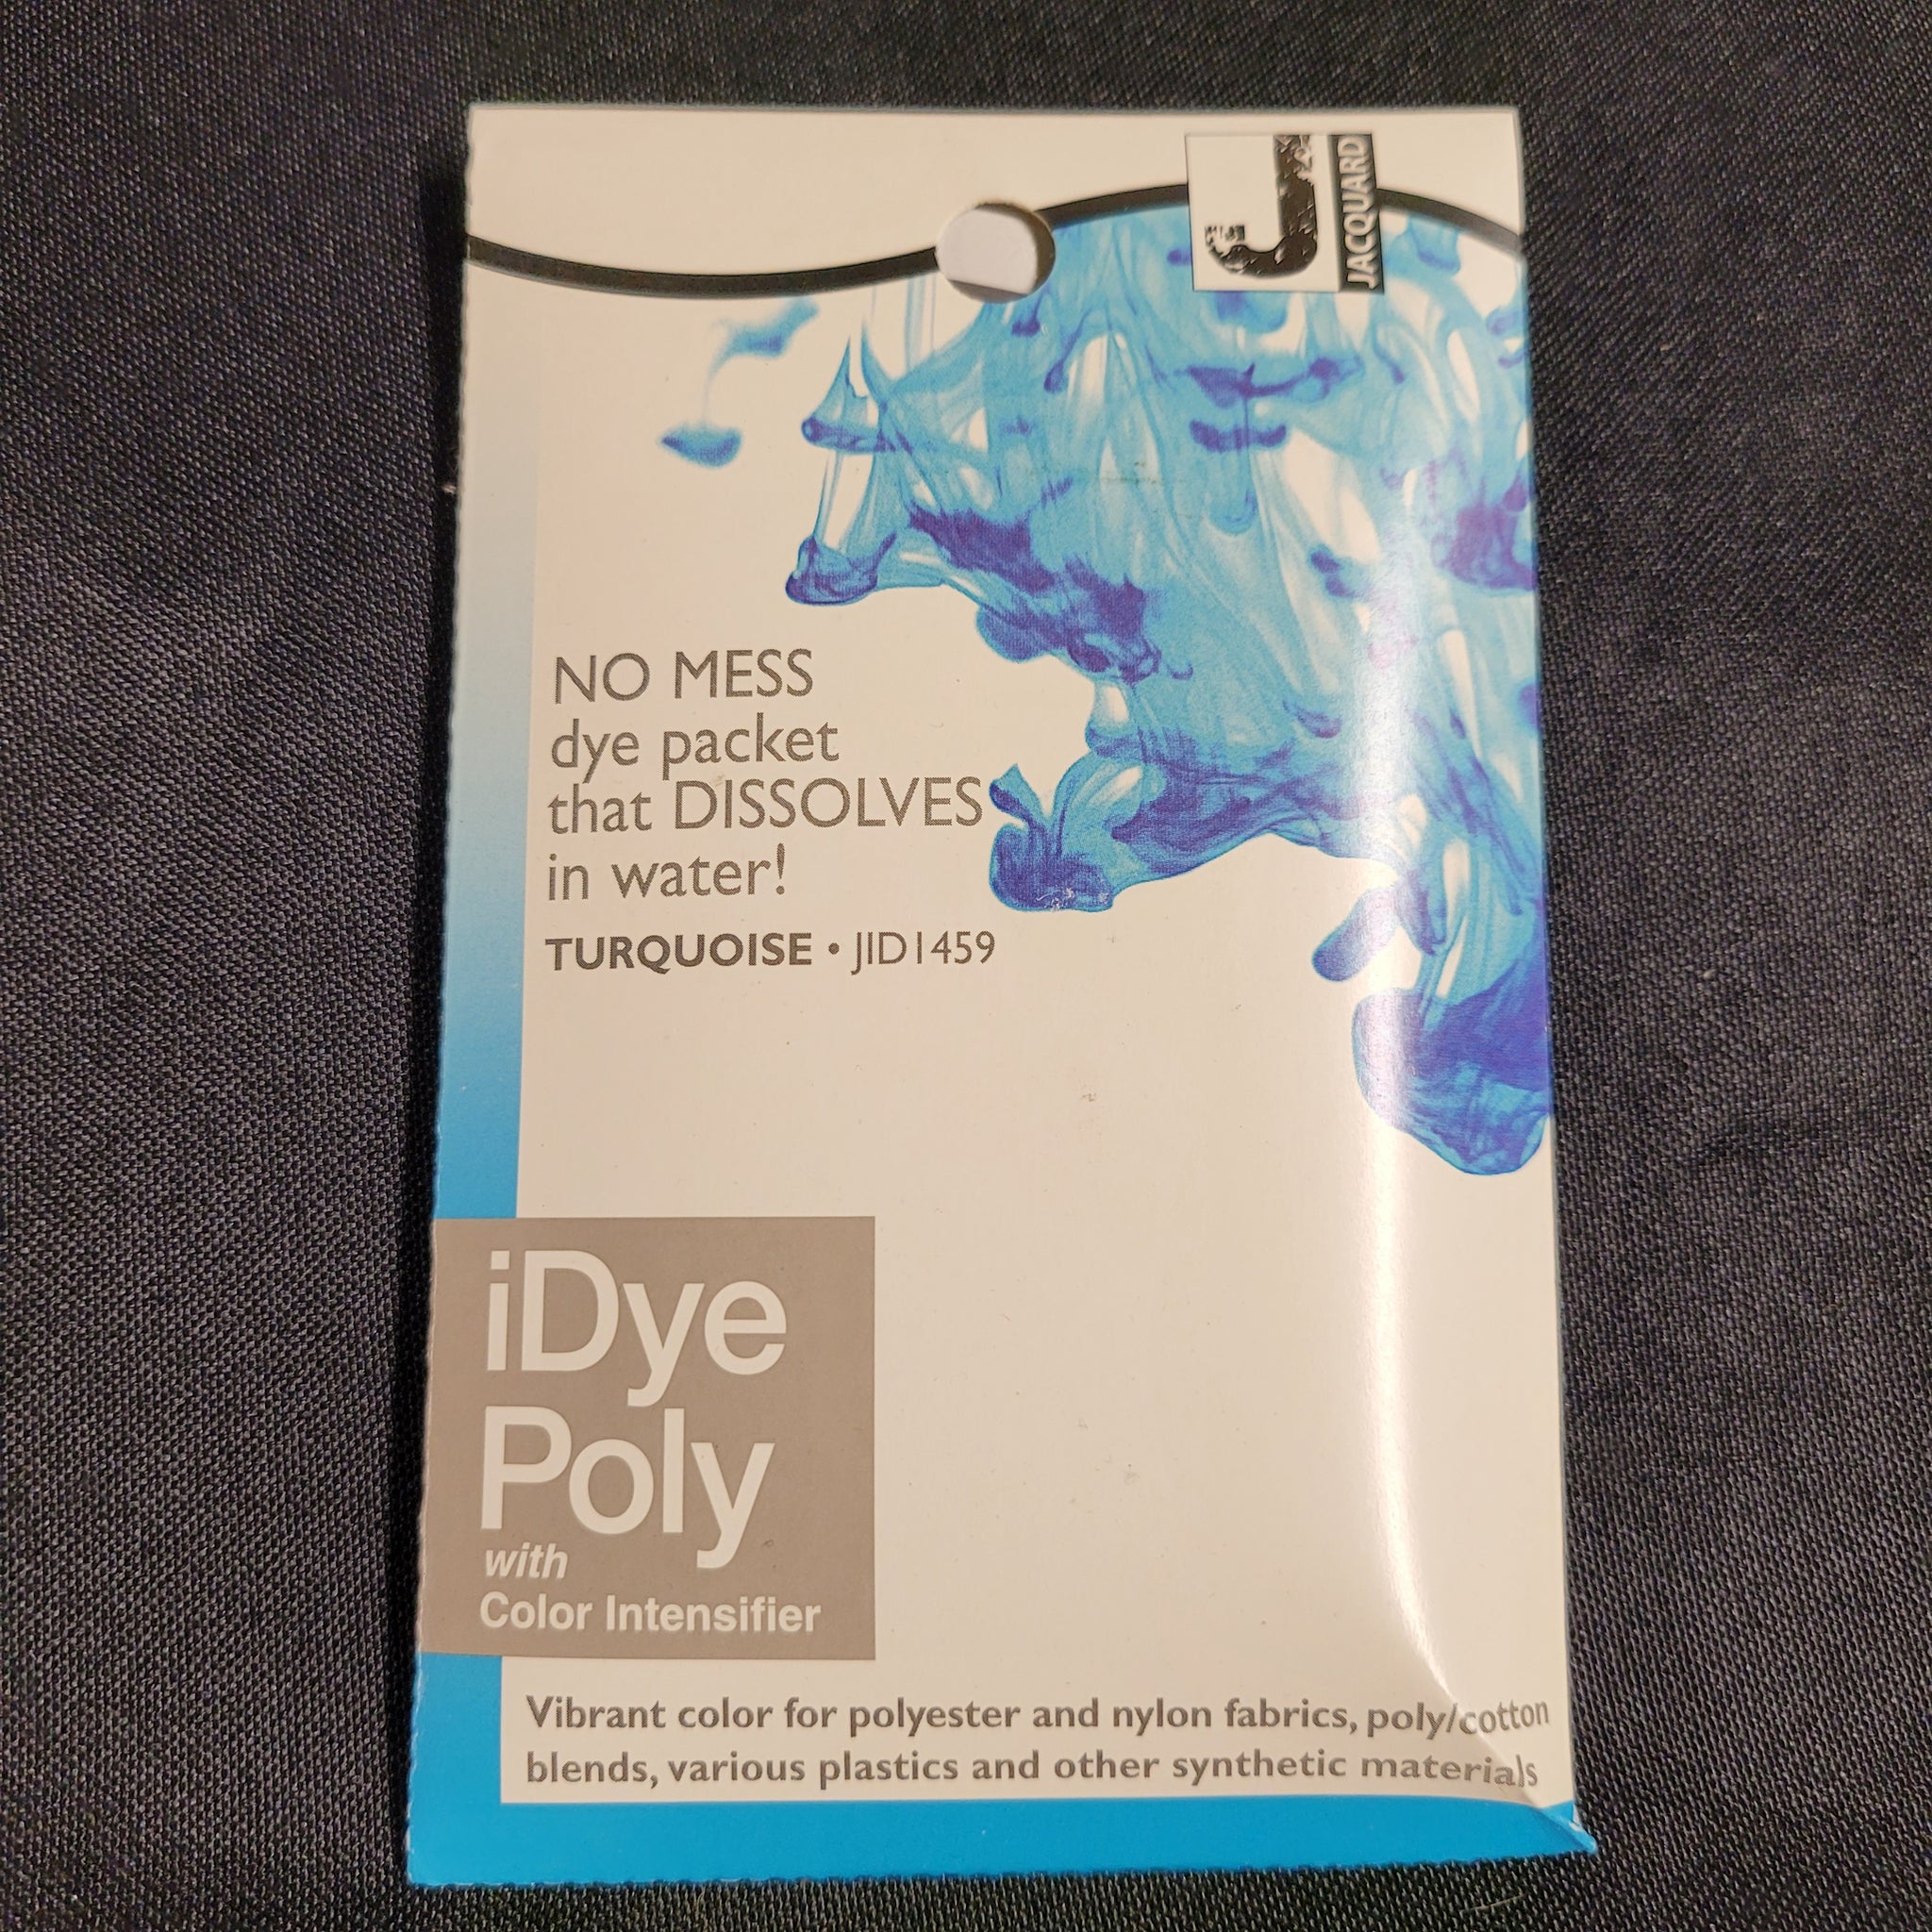 The difference between Idye Poly Blue (left) and Idye Poly